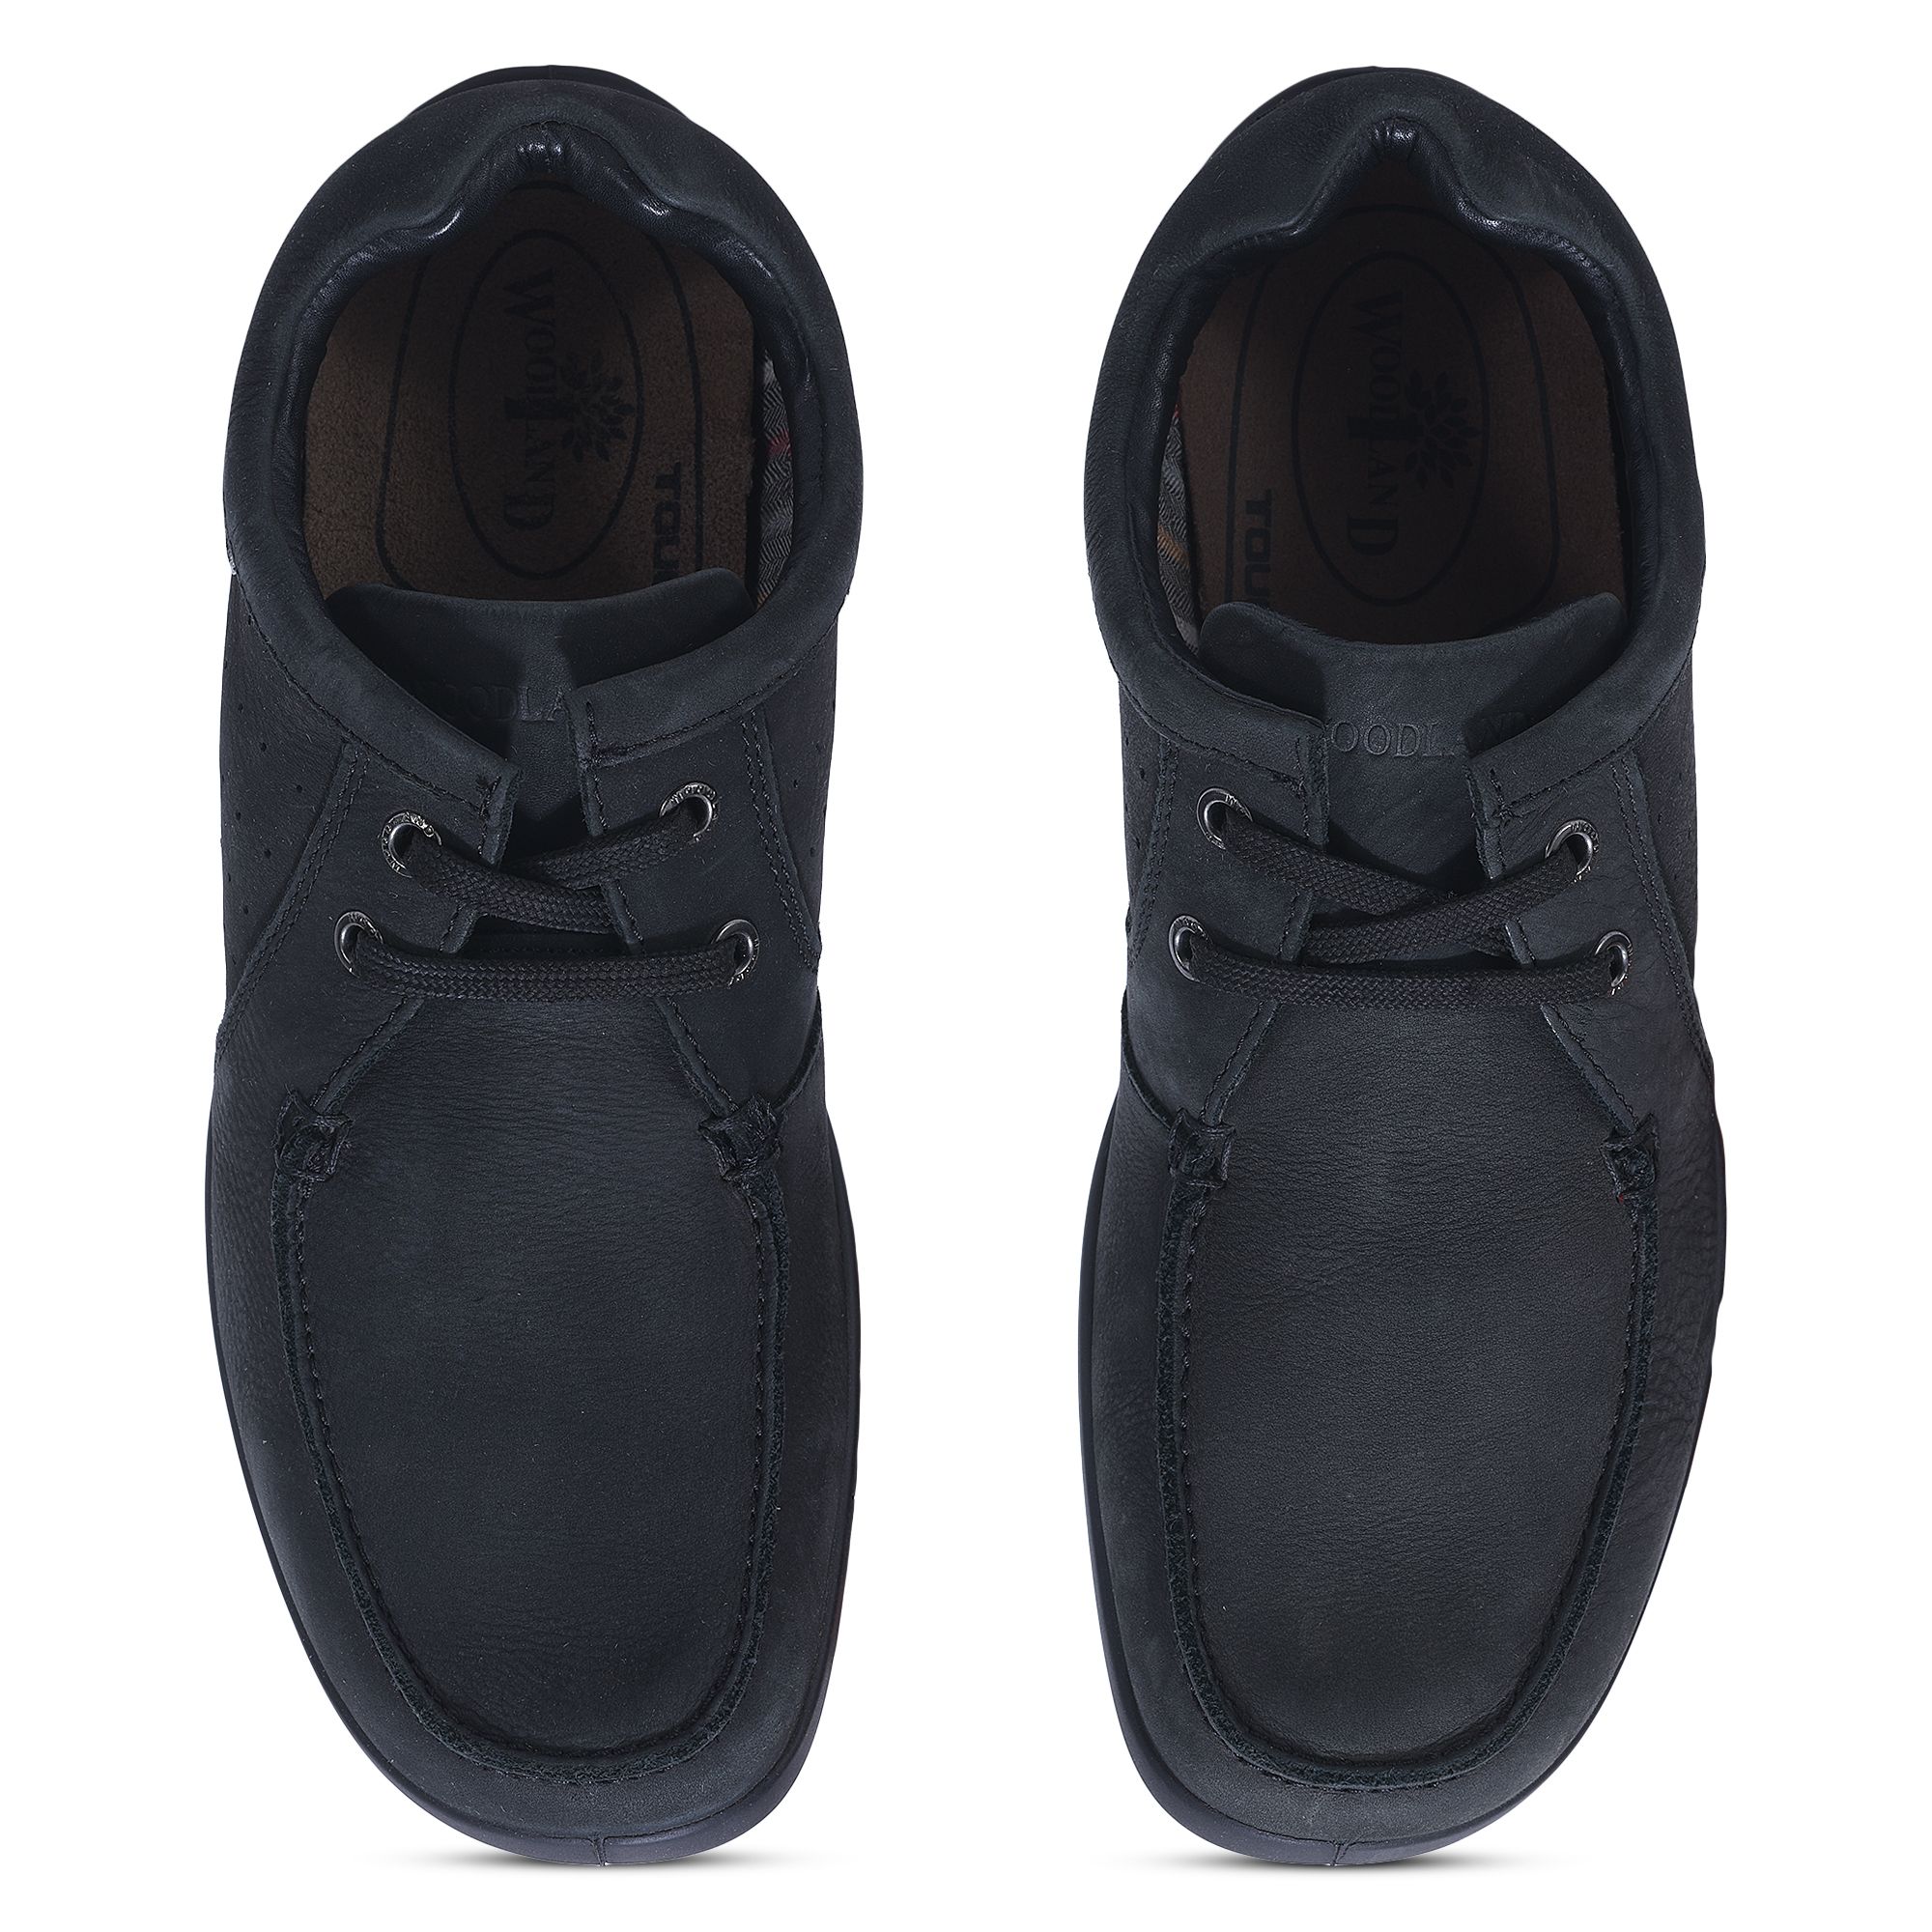 Woodland BLACK casual shoes